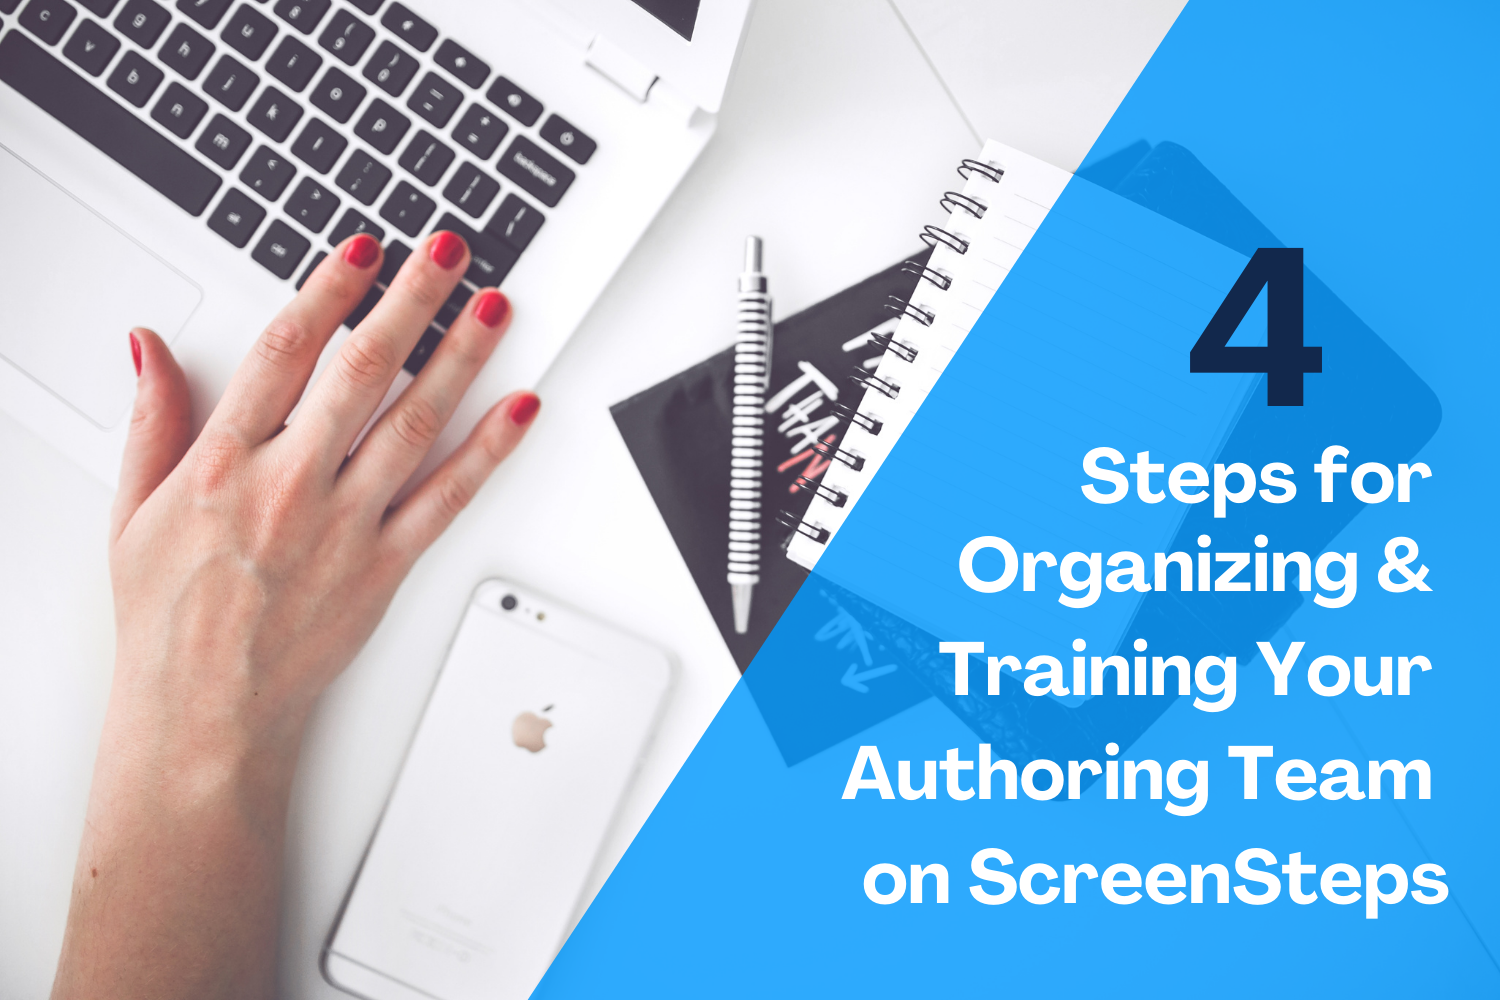 4 Steps for Organizing and Training Your Authoring Team on ScreenSteps